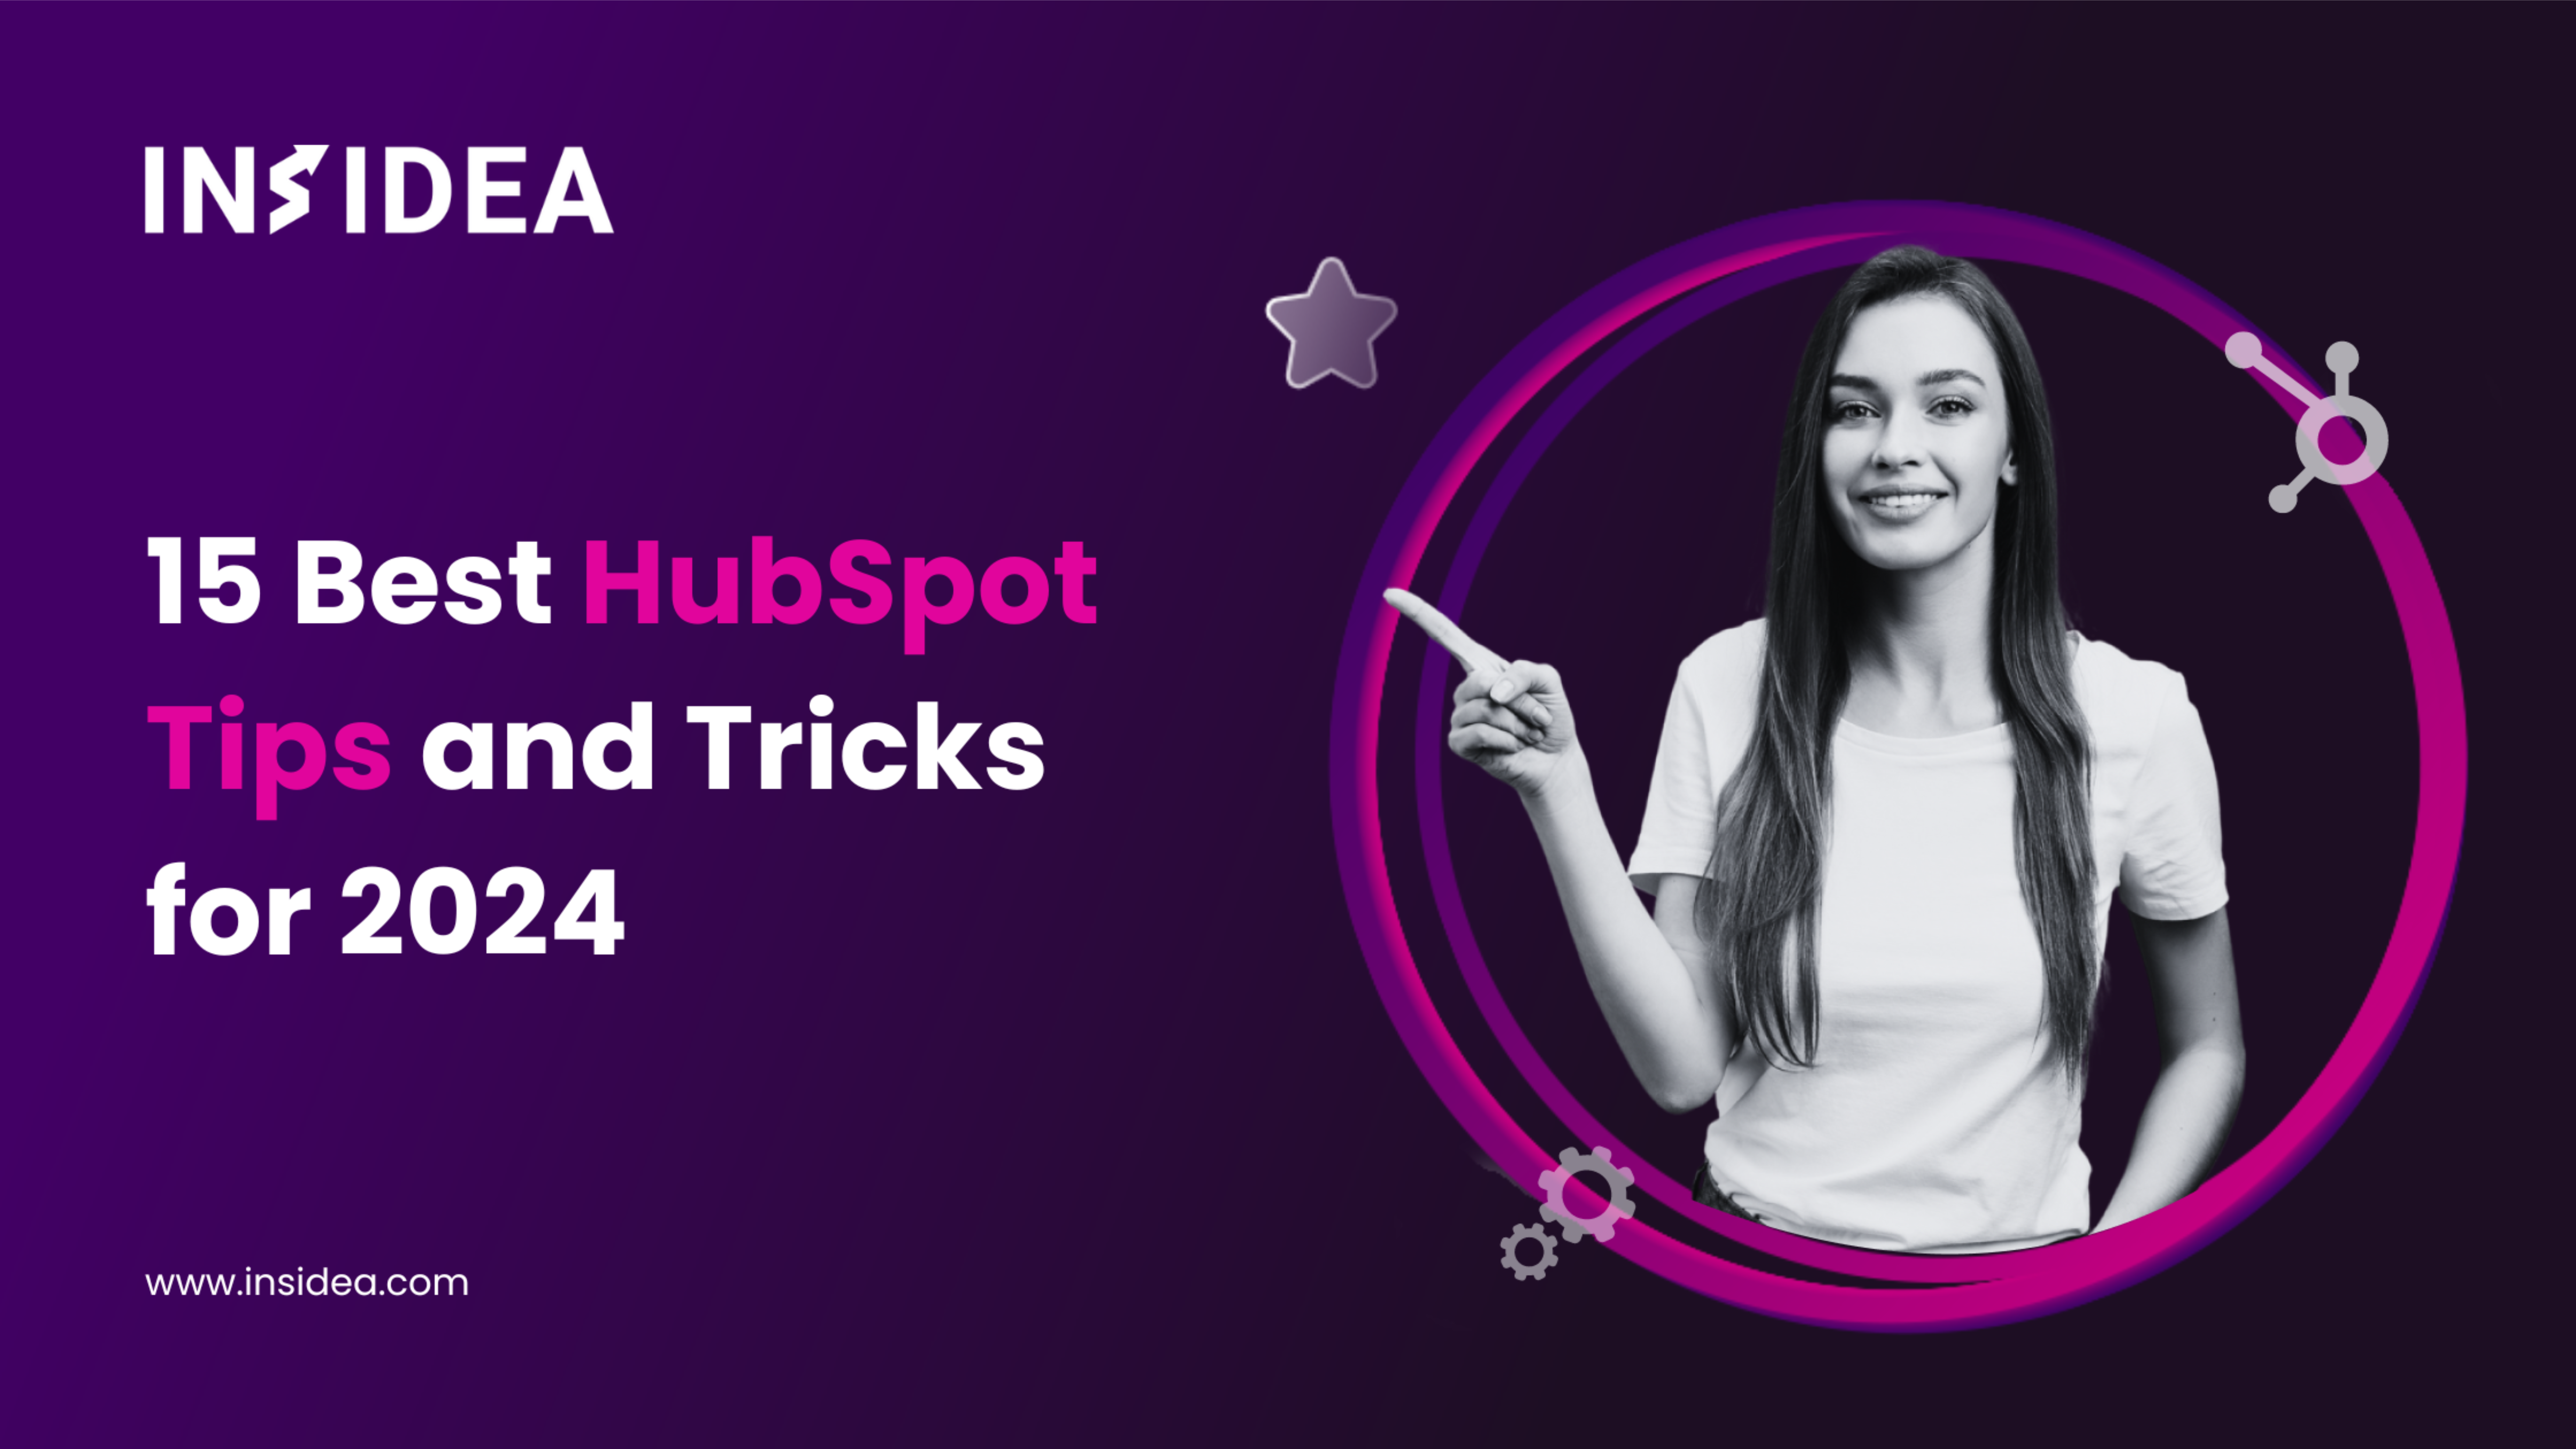 15 Best HubSpot Tips and Tricks for 2024